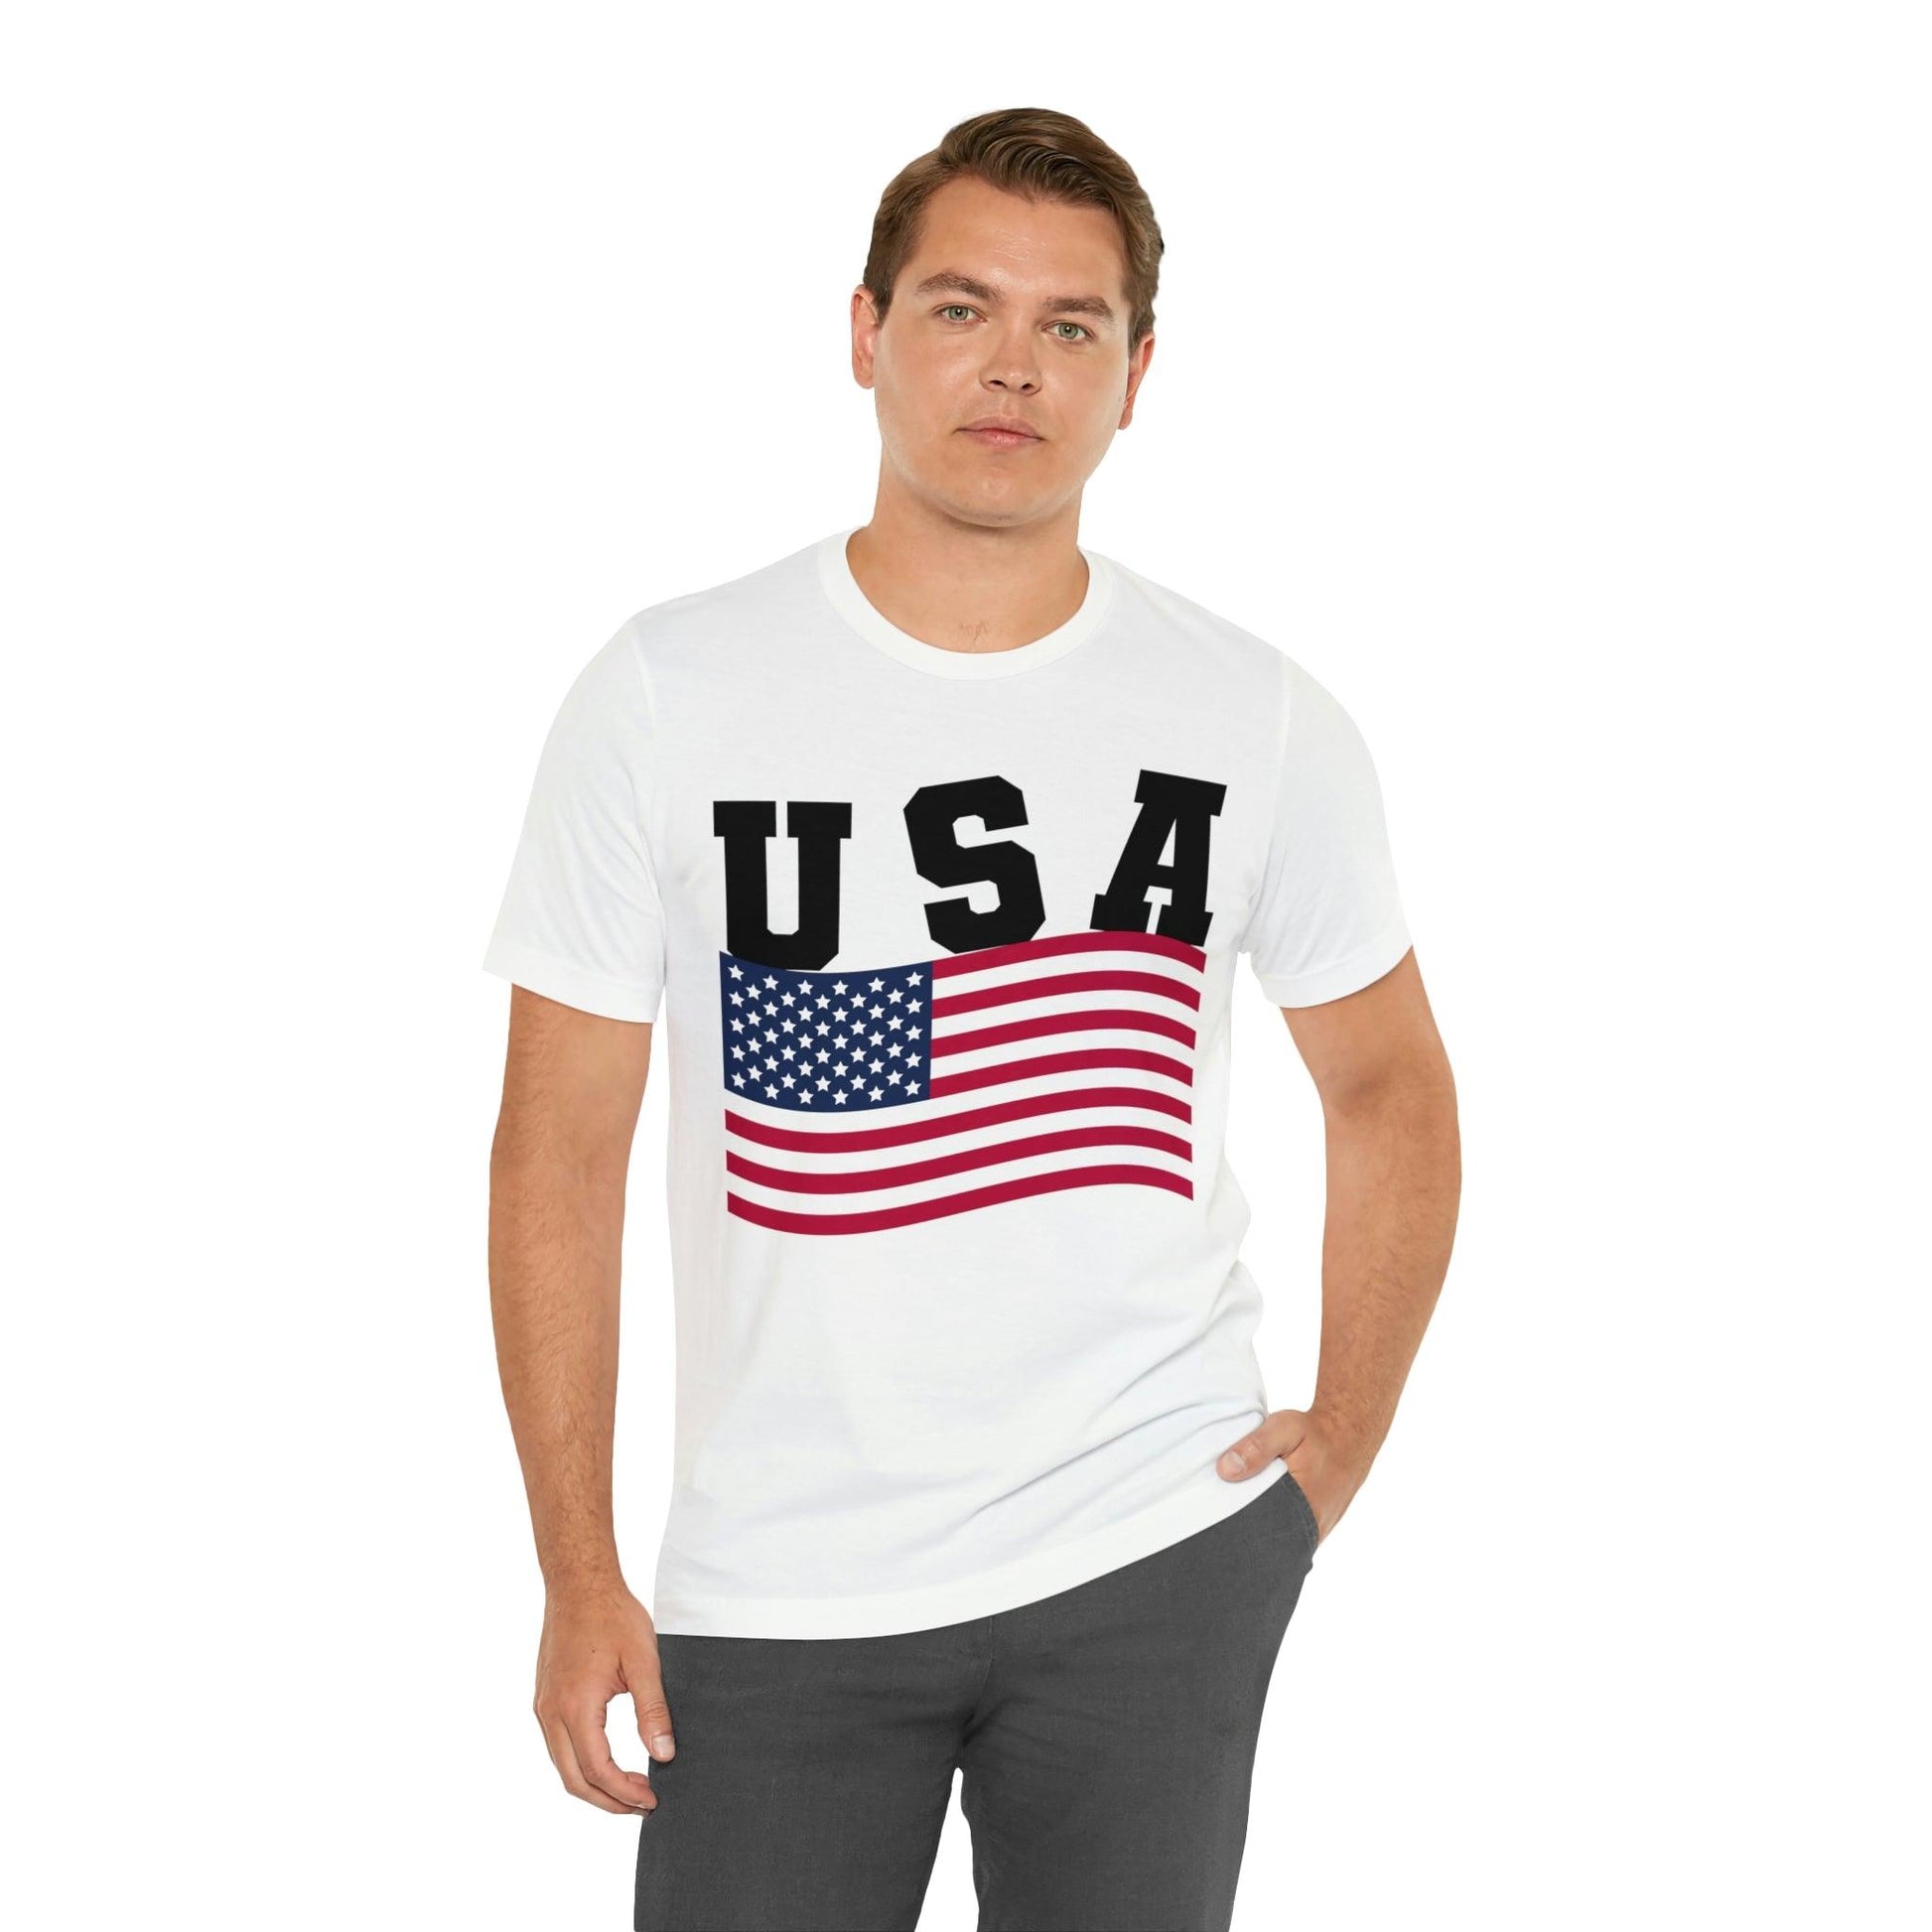 American flag shirt, Red, white, and blue shirt, 4th of July shirt - Giftsmojo